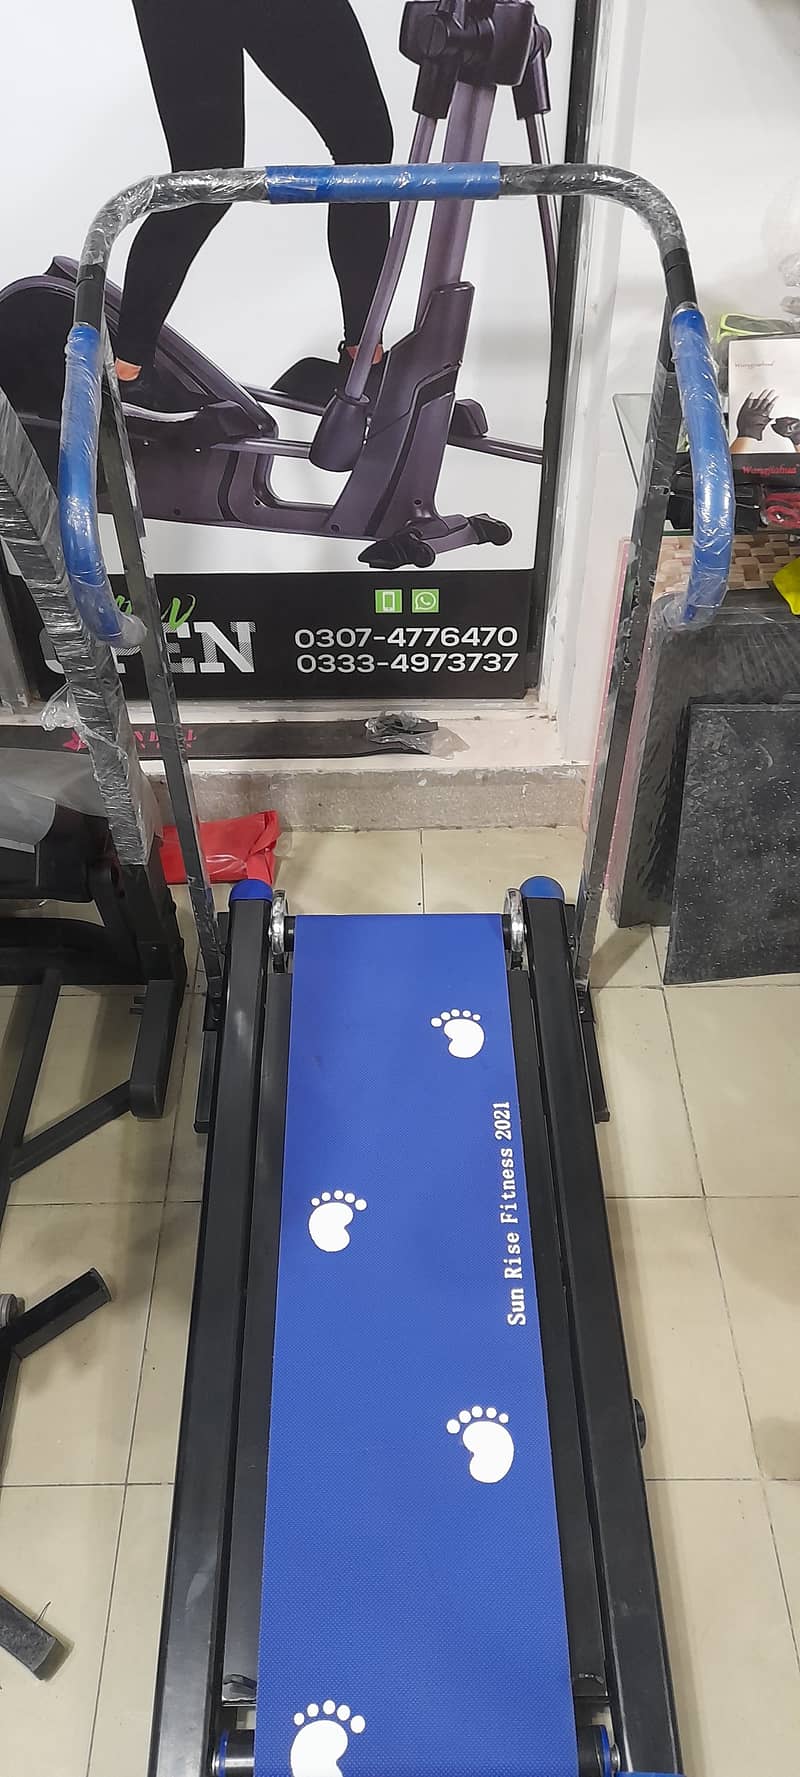 Manual Rollers Treadmill Exercise machine. 03334973737 1